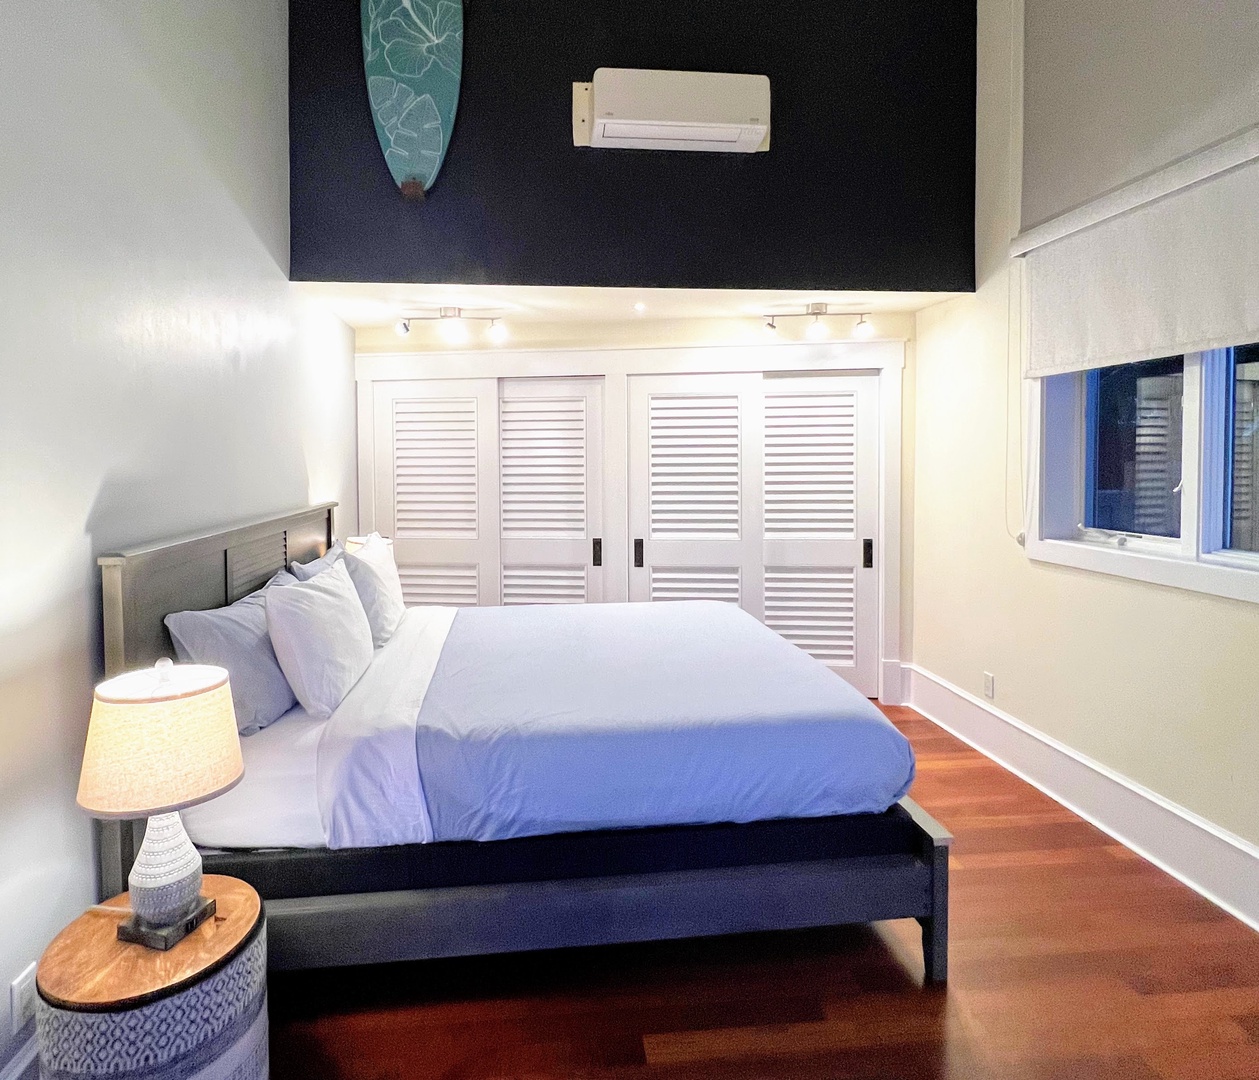 Kailua Vacation Rentals, Lanikai Villa - Guest Bedroom 3 is equipped with a king bed, garden views, and split A/C